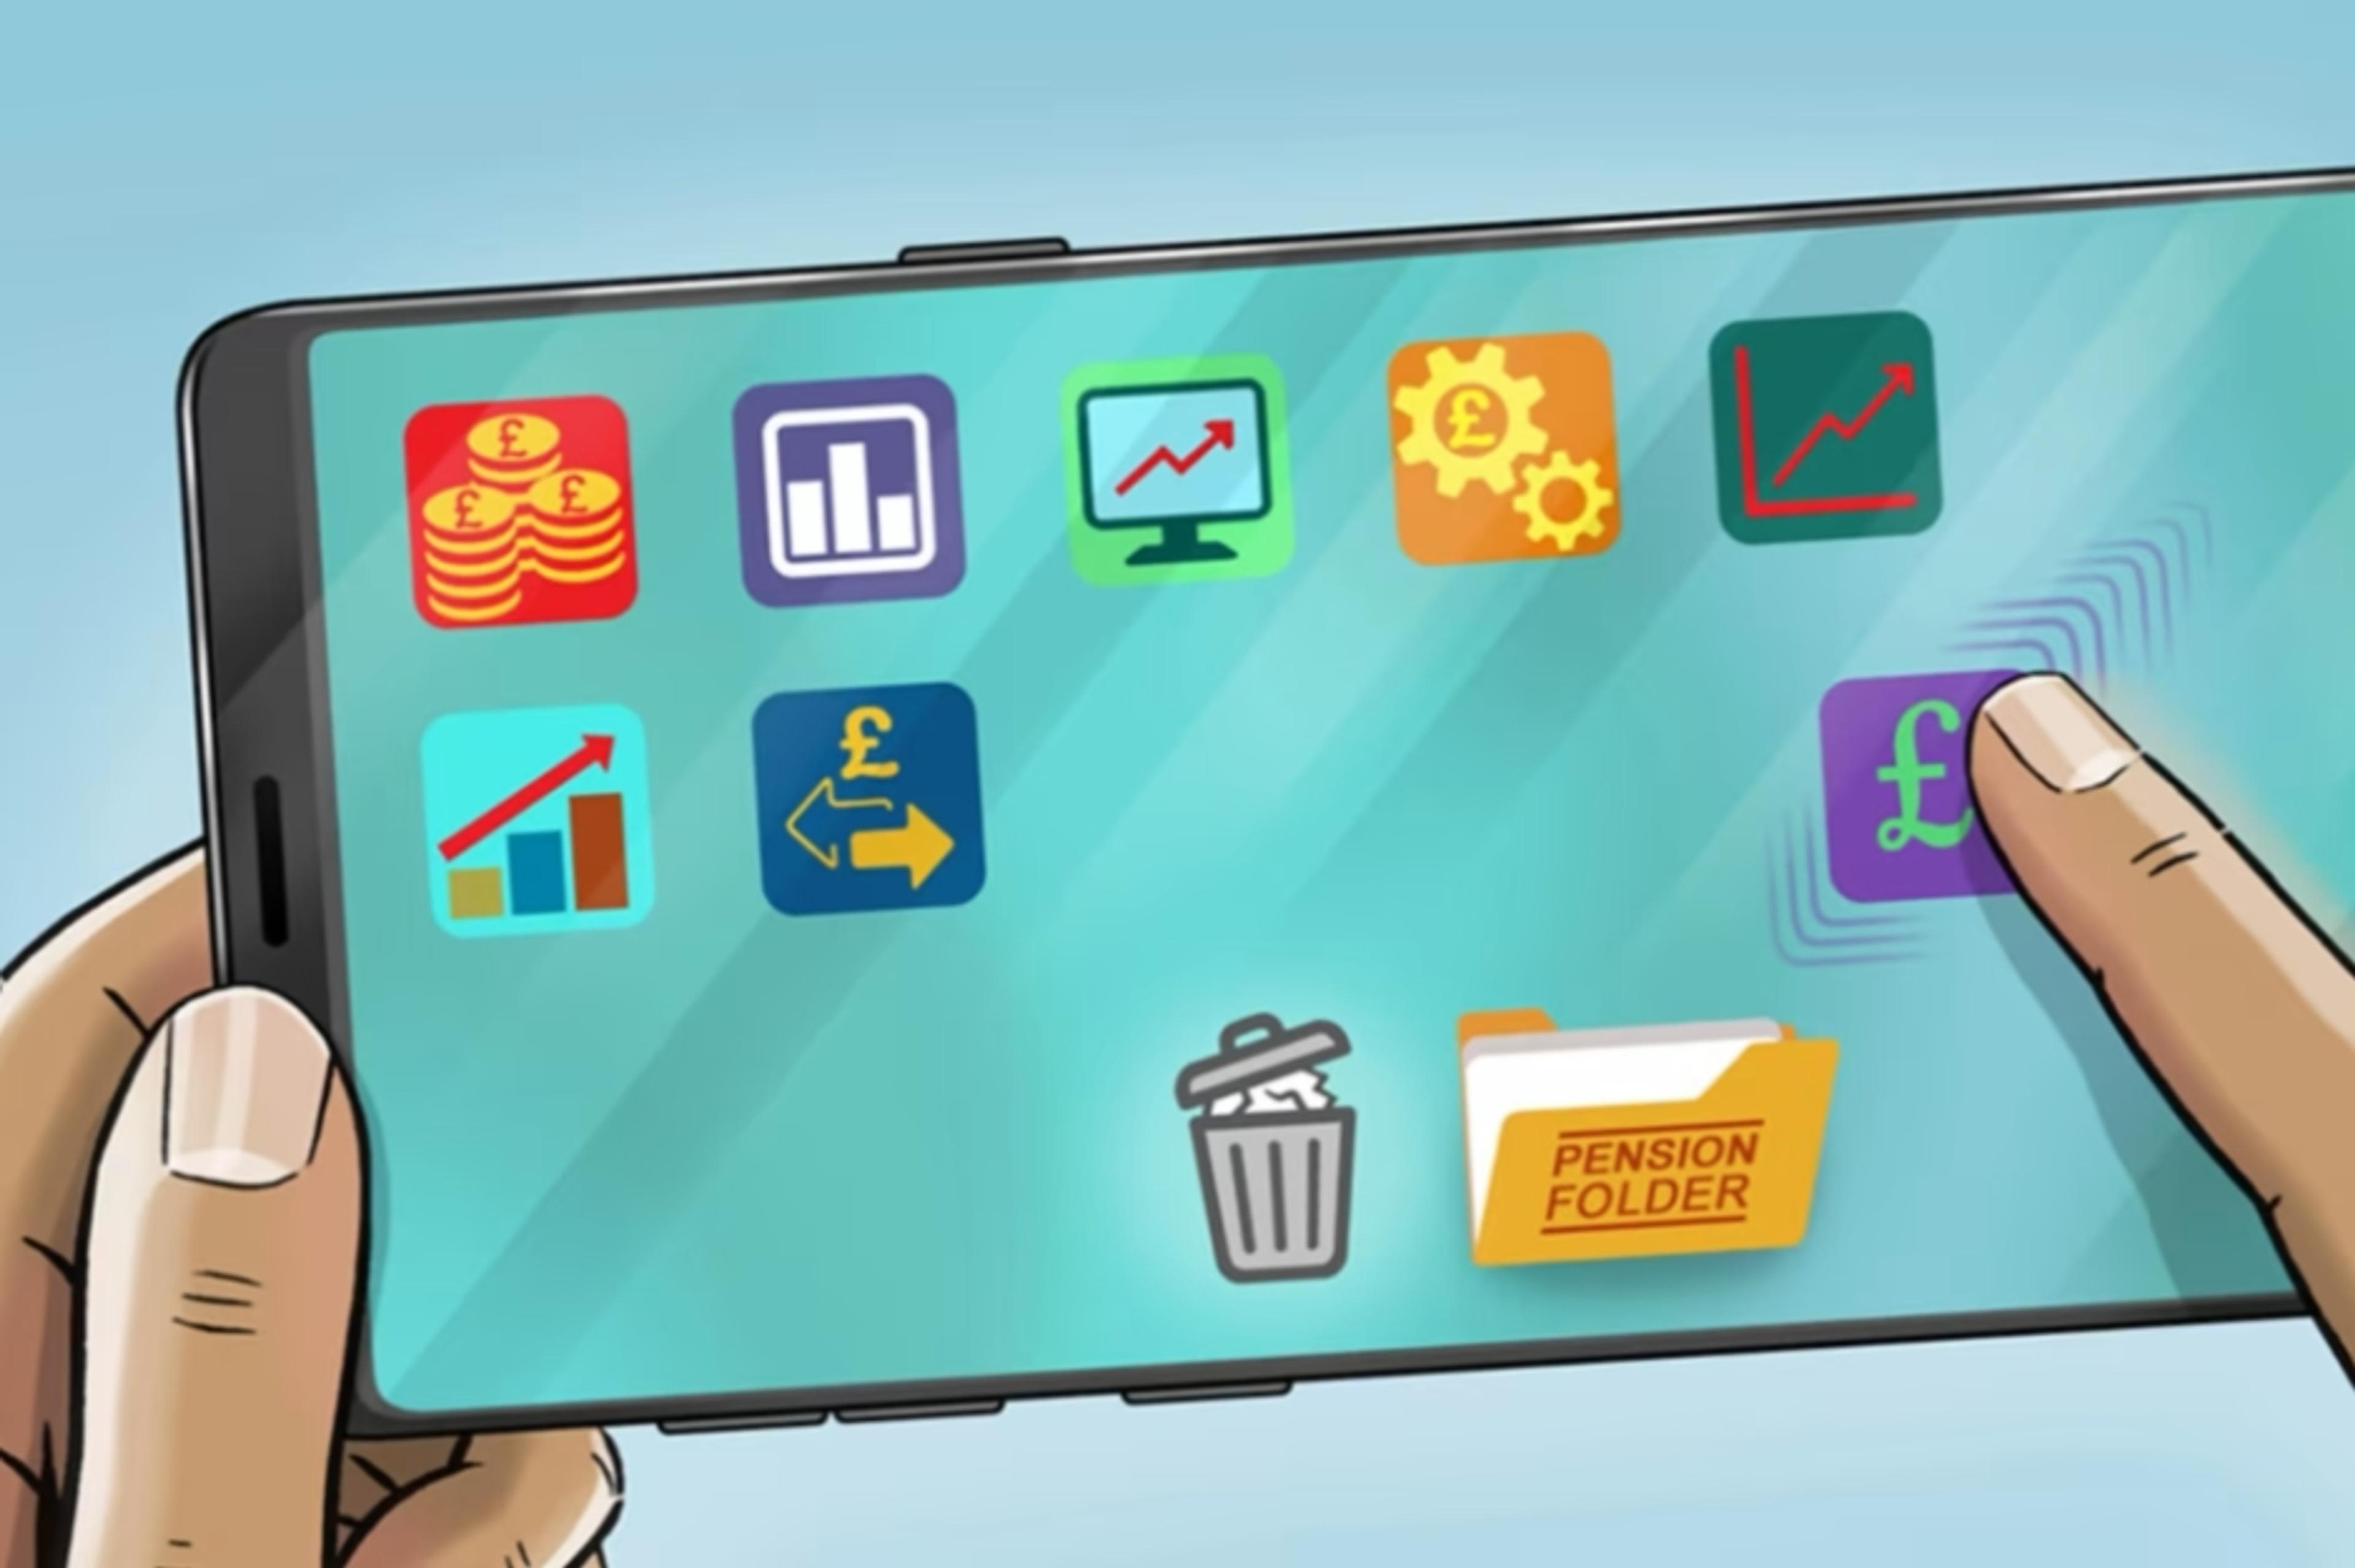 A cartoon of a mobile phone and a pension app icon